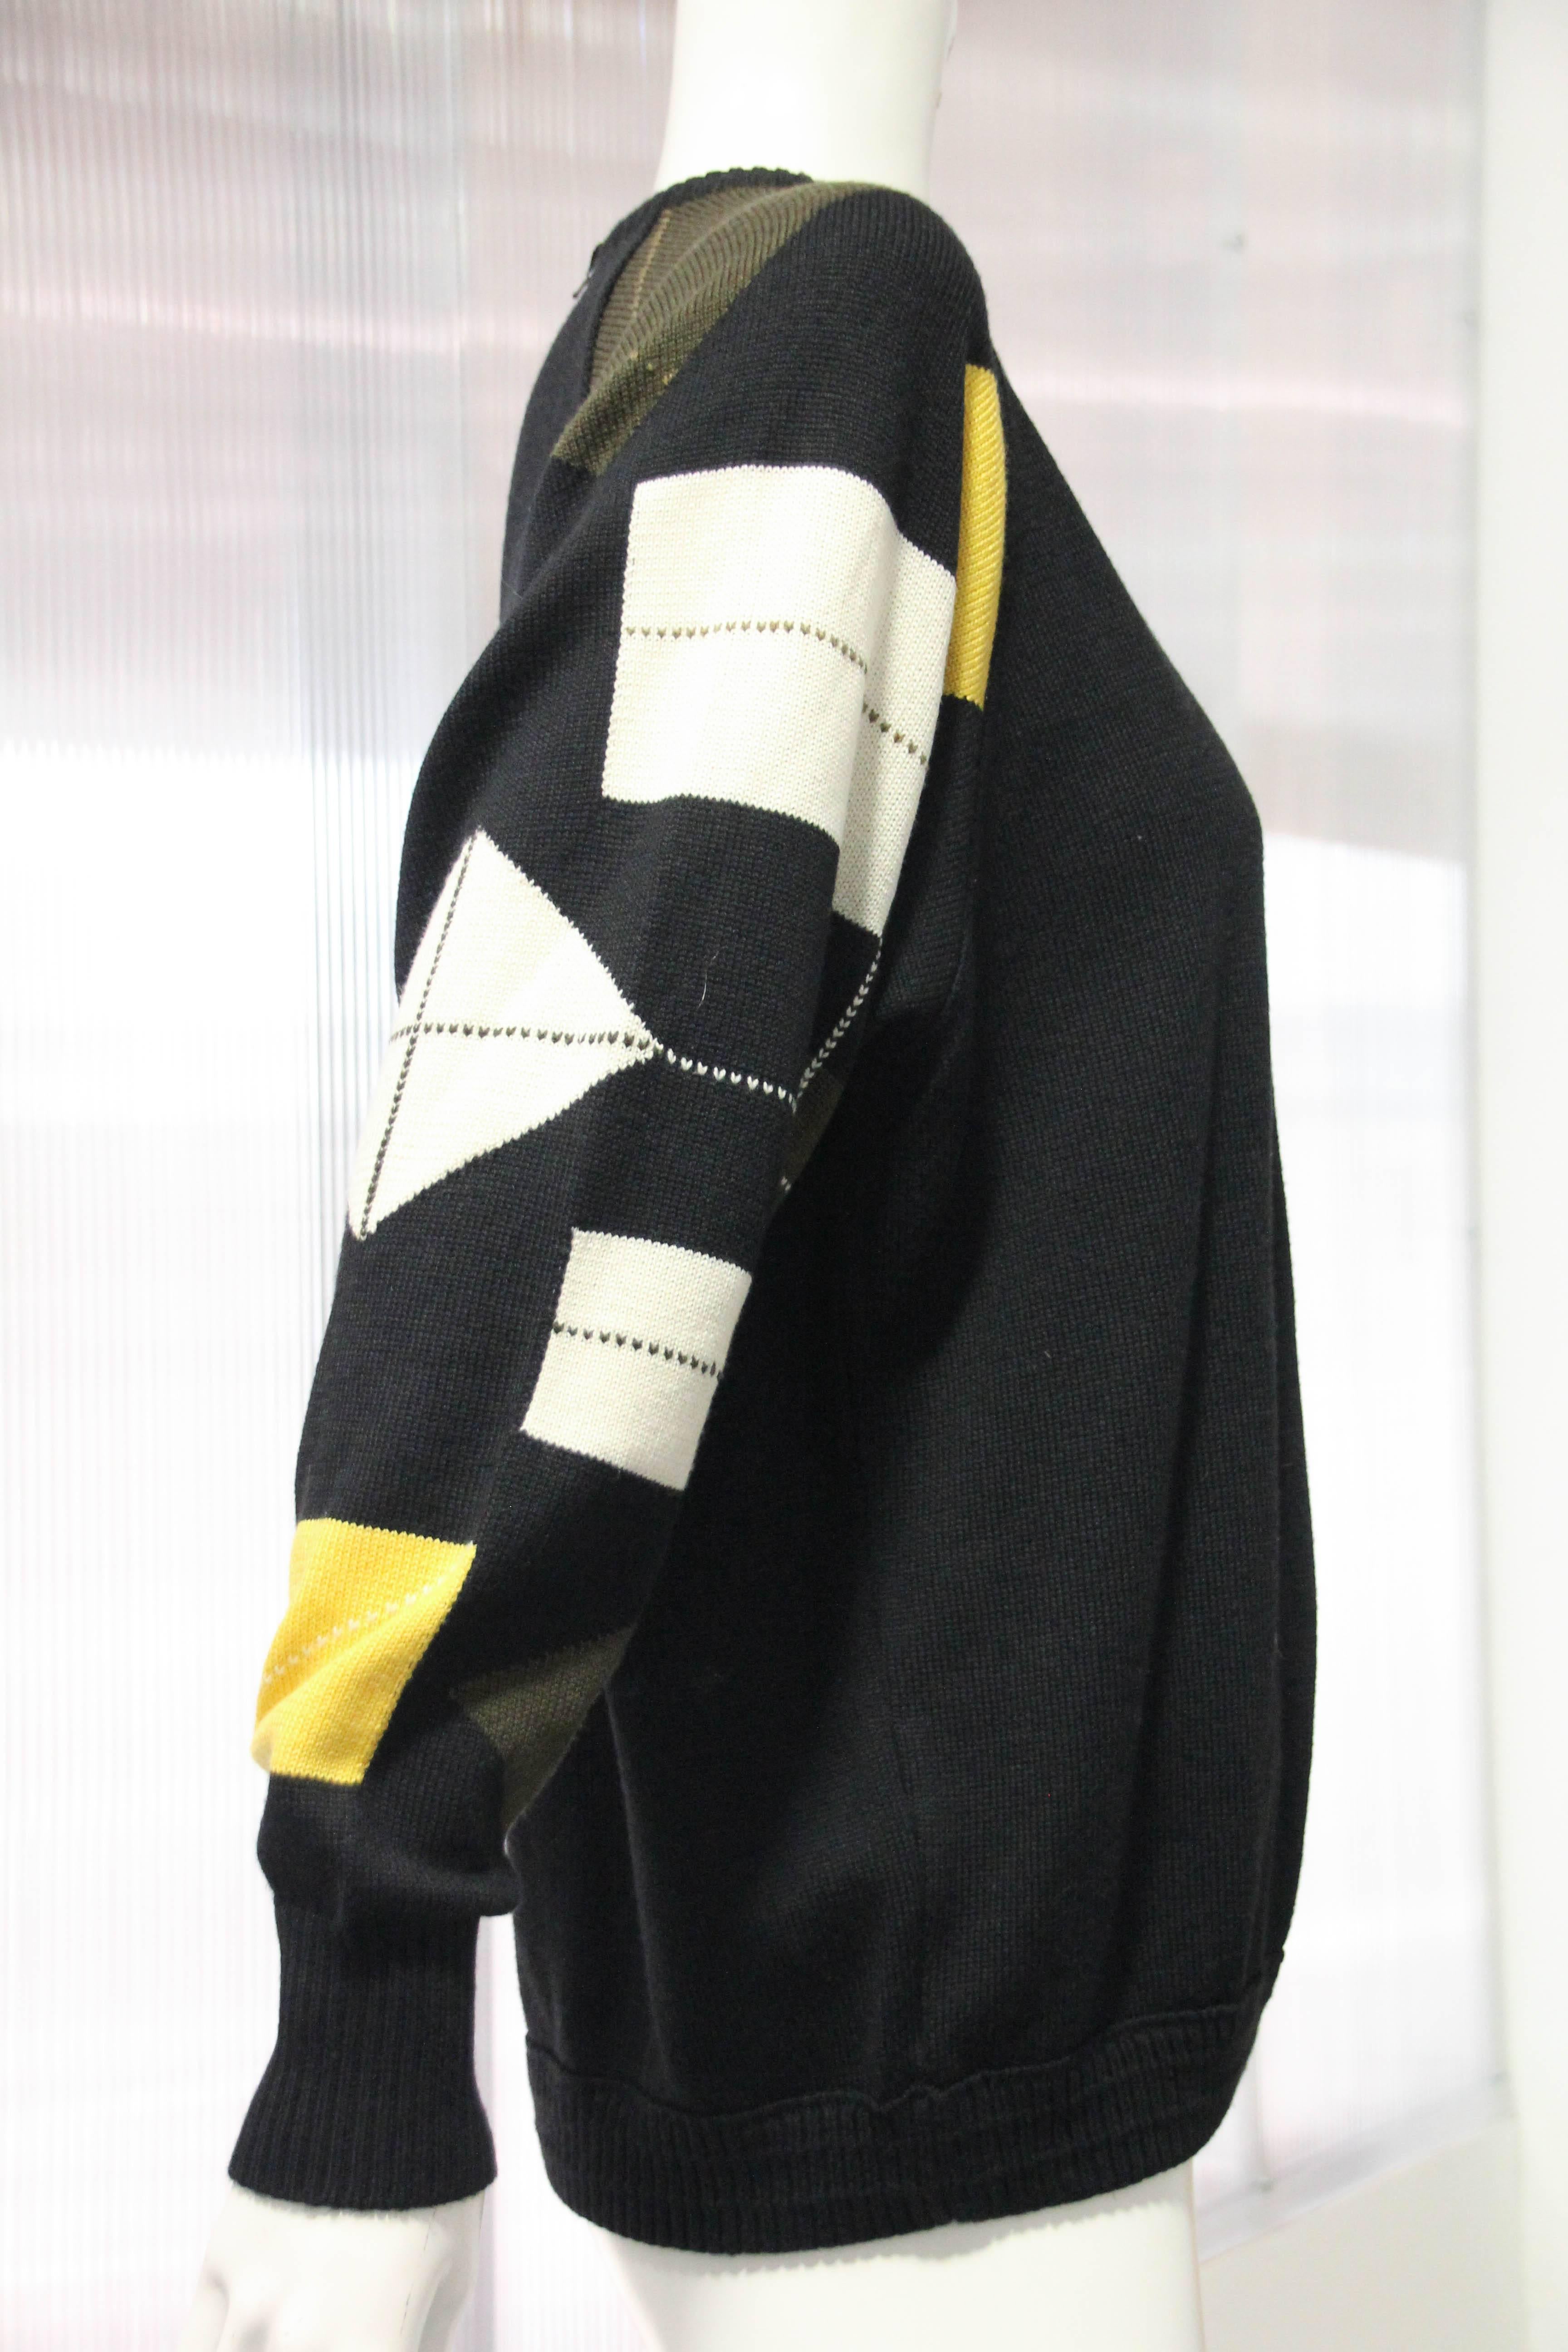 1980s Gianni Versace deconstructed argyle patterned wool sweater with grosgrain trimmed back zipper. Over-sized fit.